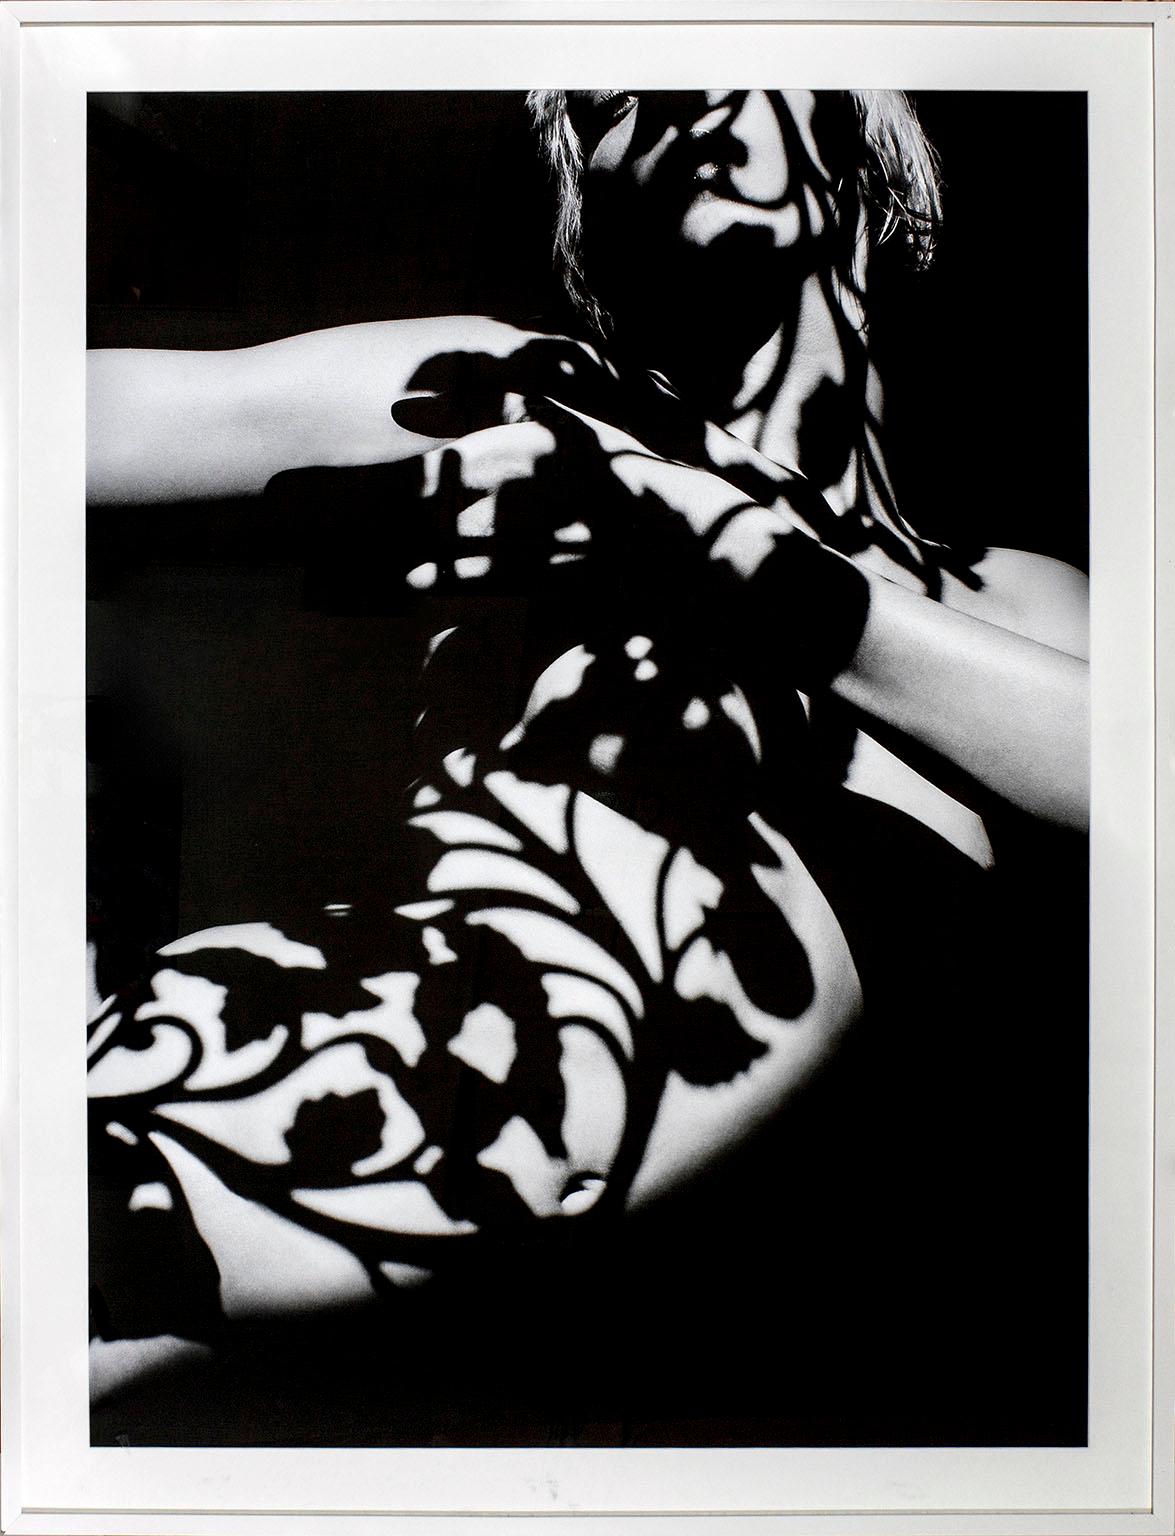 "Ivy" acrylic with fiber based paper by fashion photographer Greg Lotus. Female nude covered with shadows of ivy plant. Black and white. From an edition of 25. Image size approximately: 57 x 40 1/2 inches. 